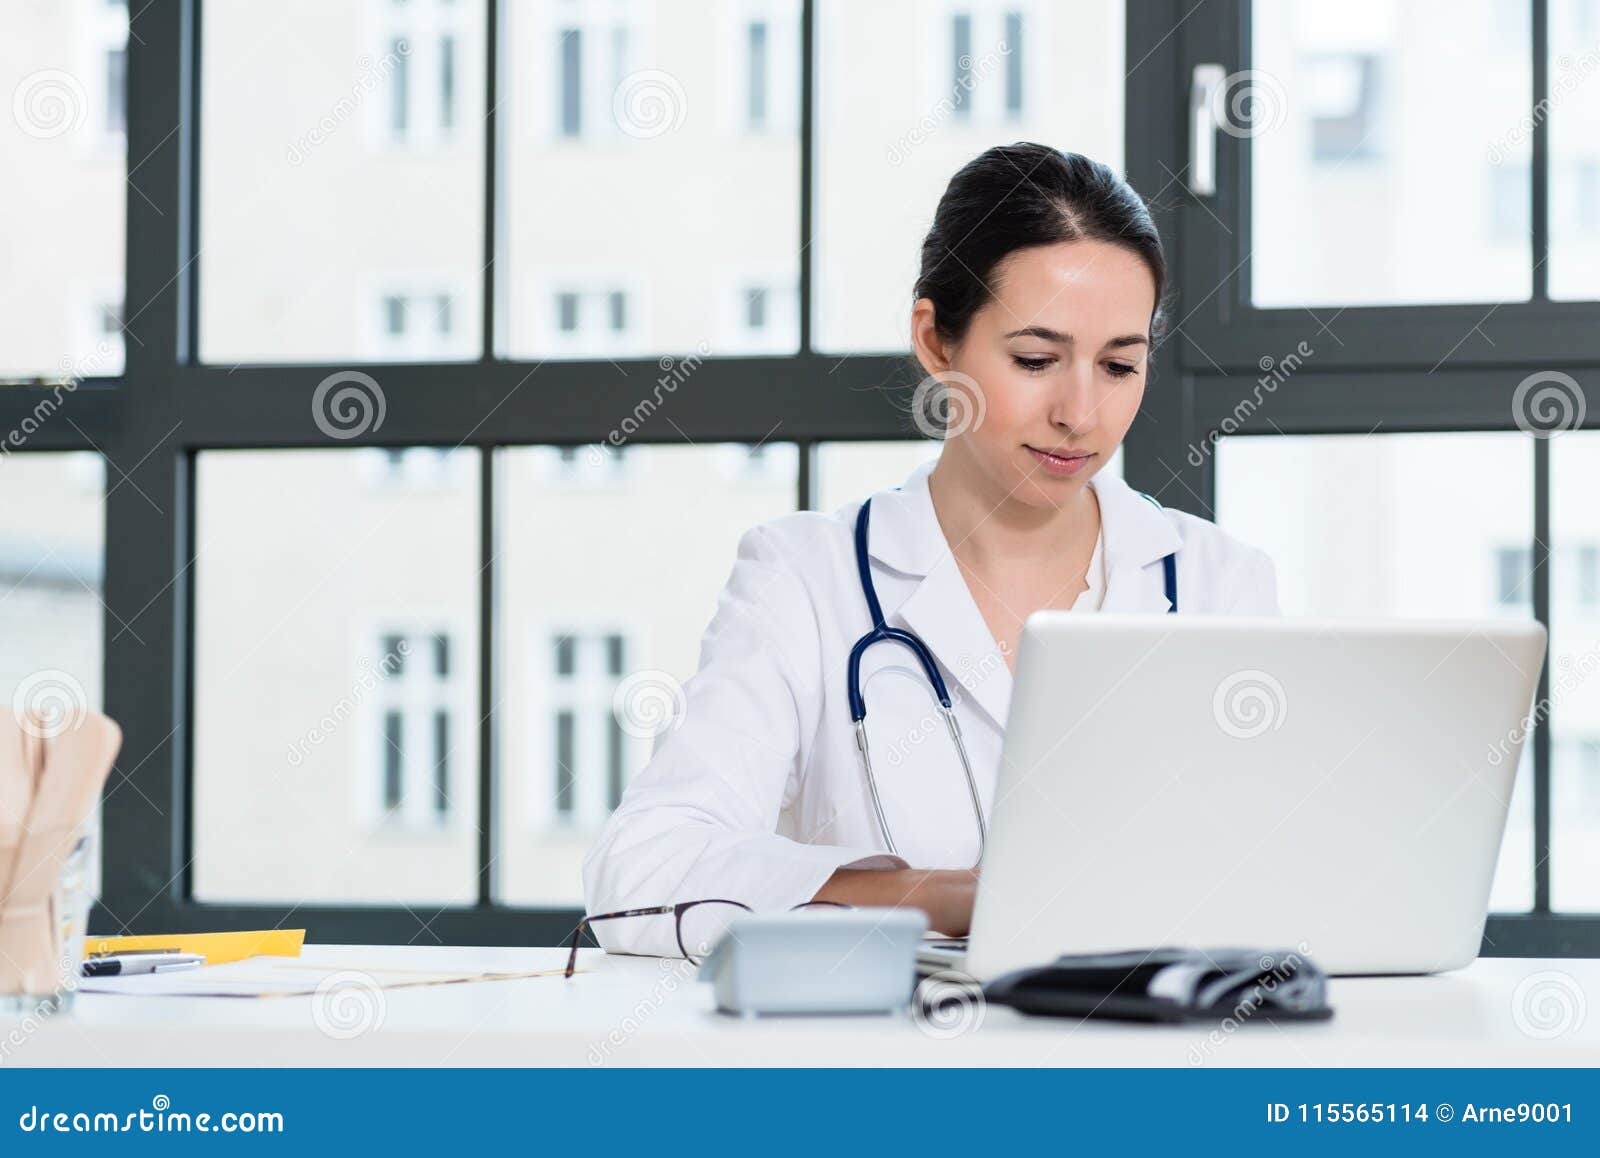 portrait of young female physician working on laptop in the office